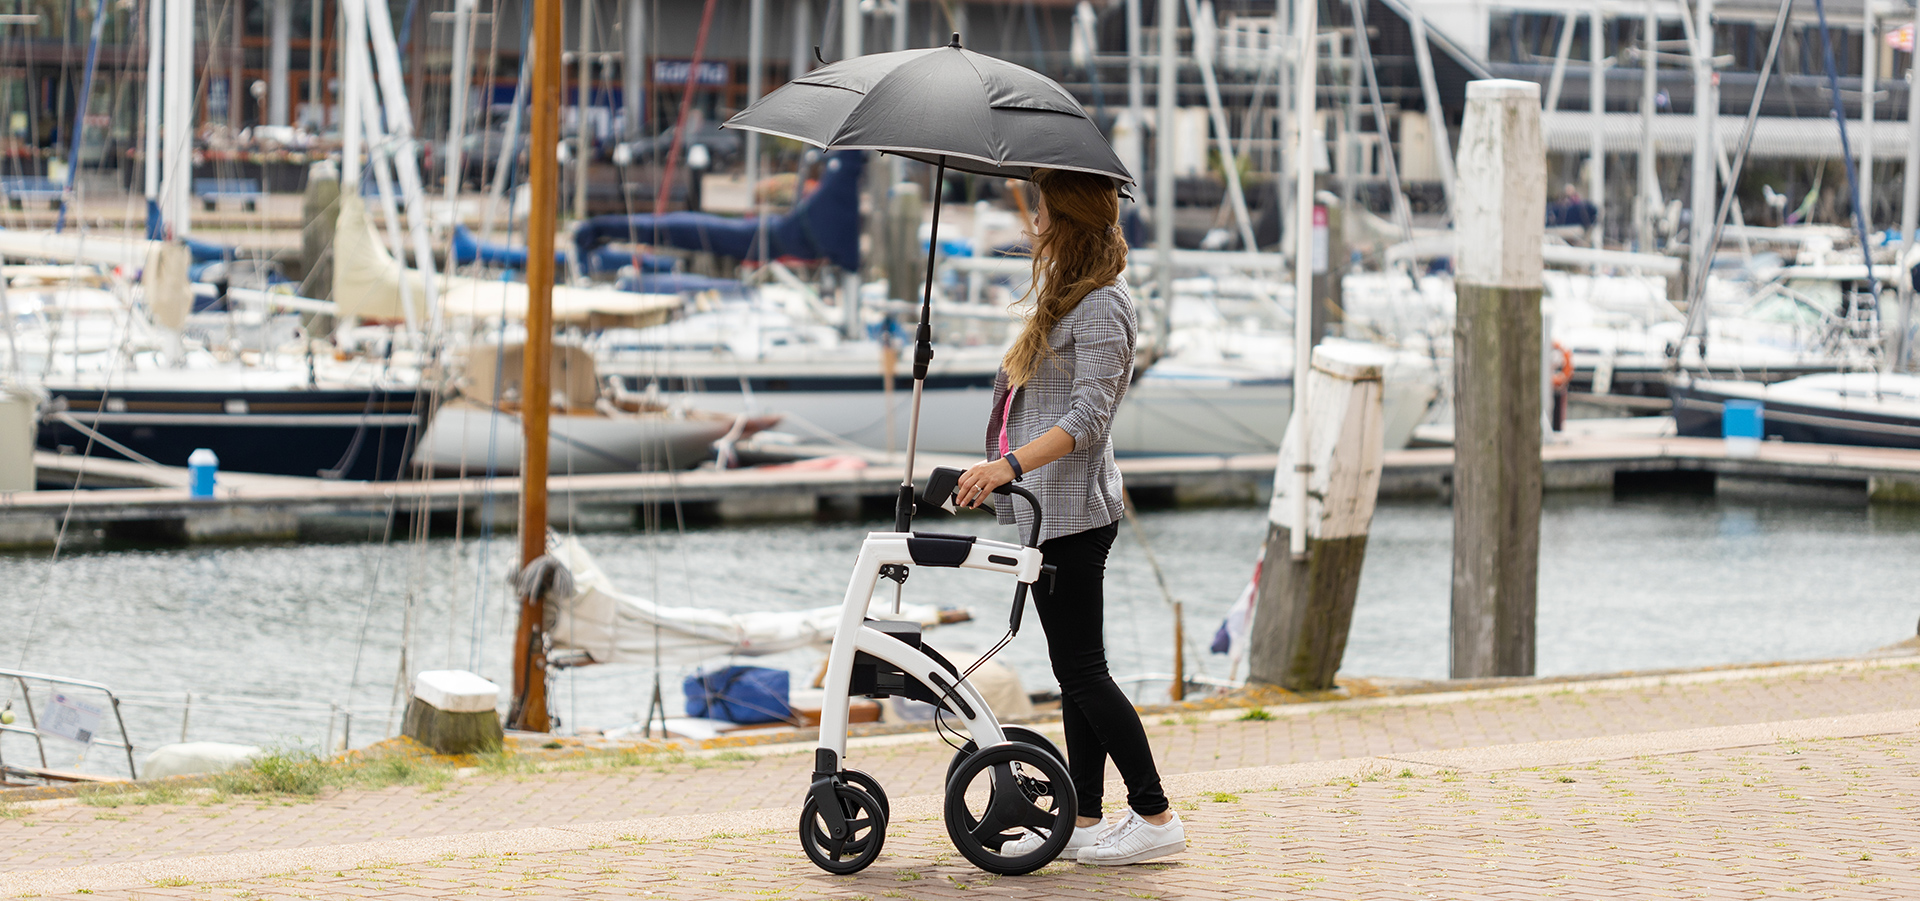 Walking upright with a Rollz Motion stable rollator and umbrella